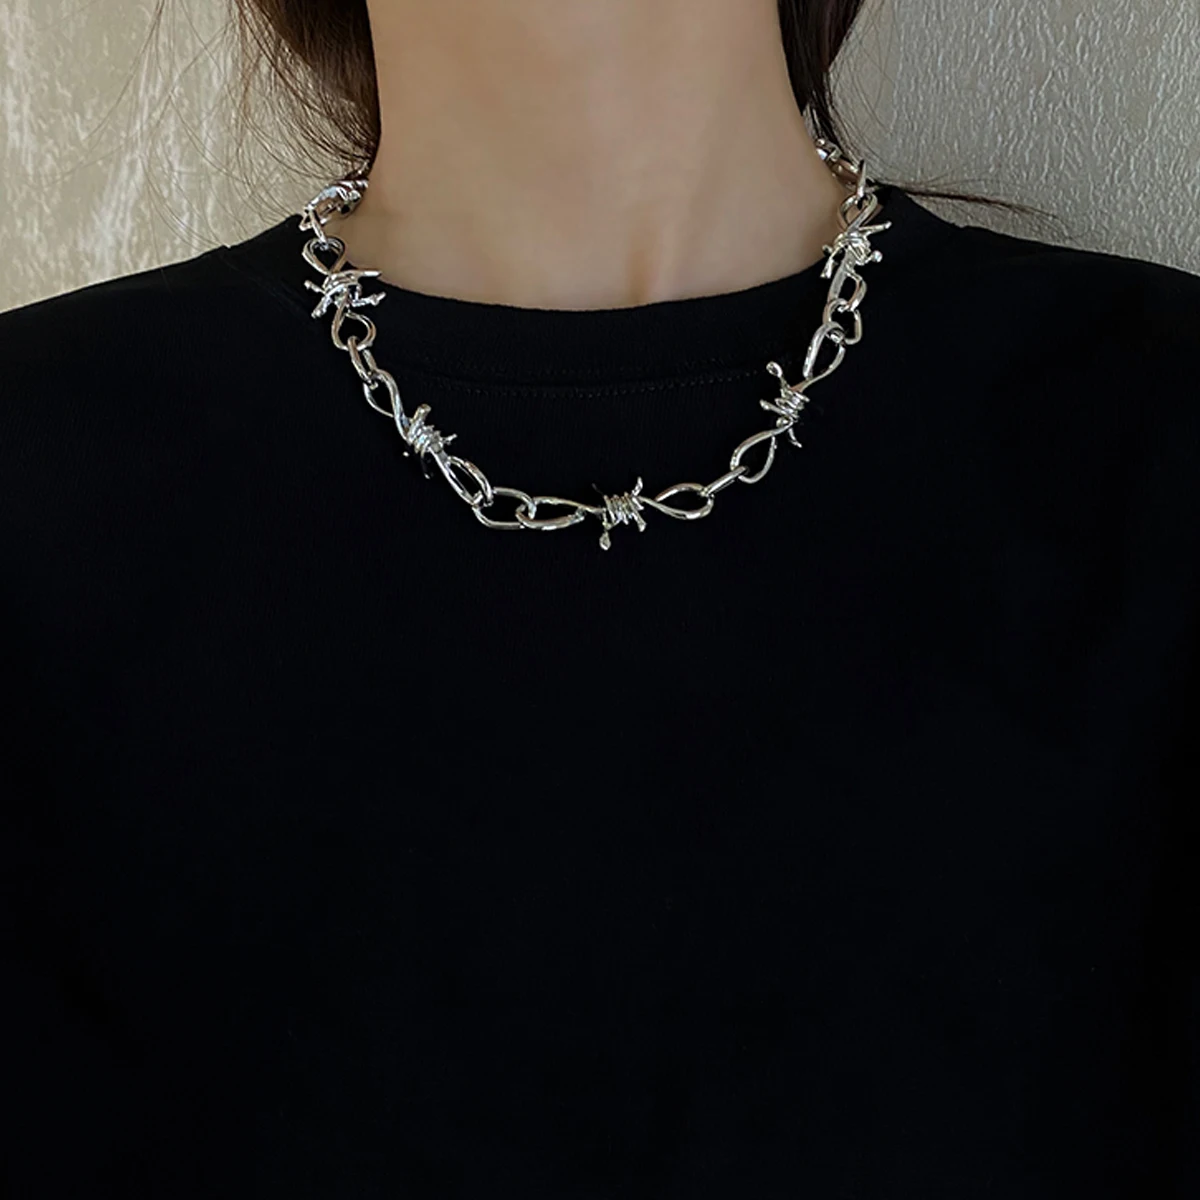 

Brambles Iron Unisex Choker Necklace Women Hip-hop Gothic Punk Style Barbed Wire Little thorns Chain Choker Gifts